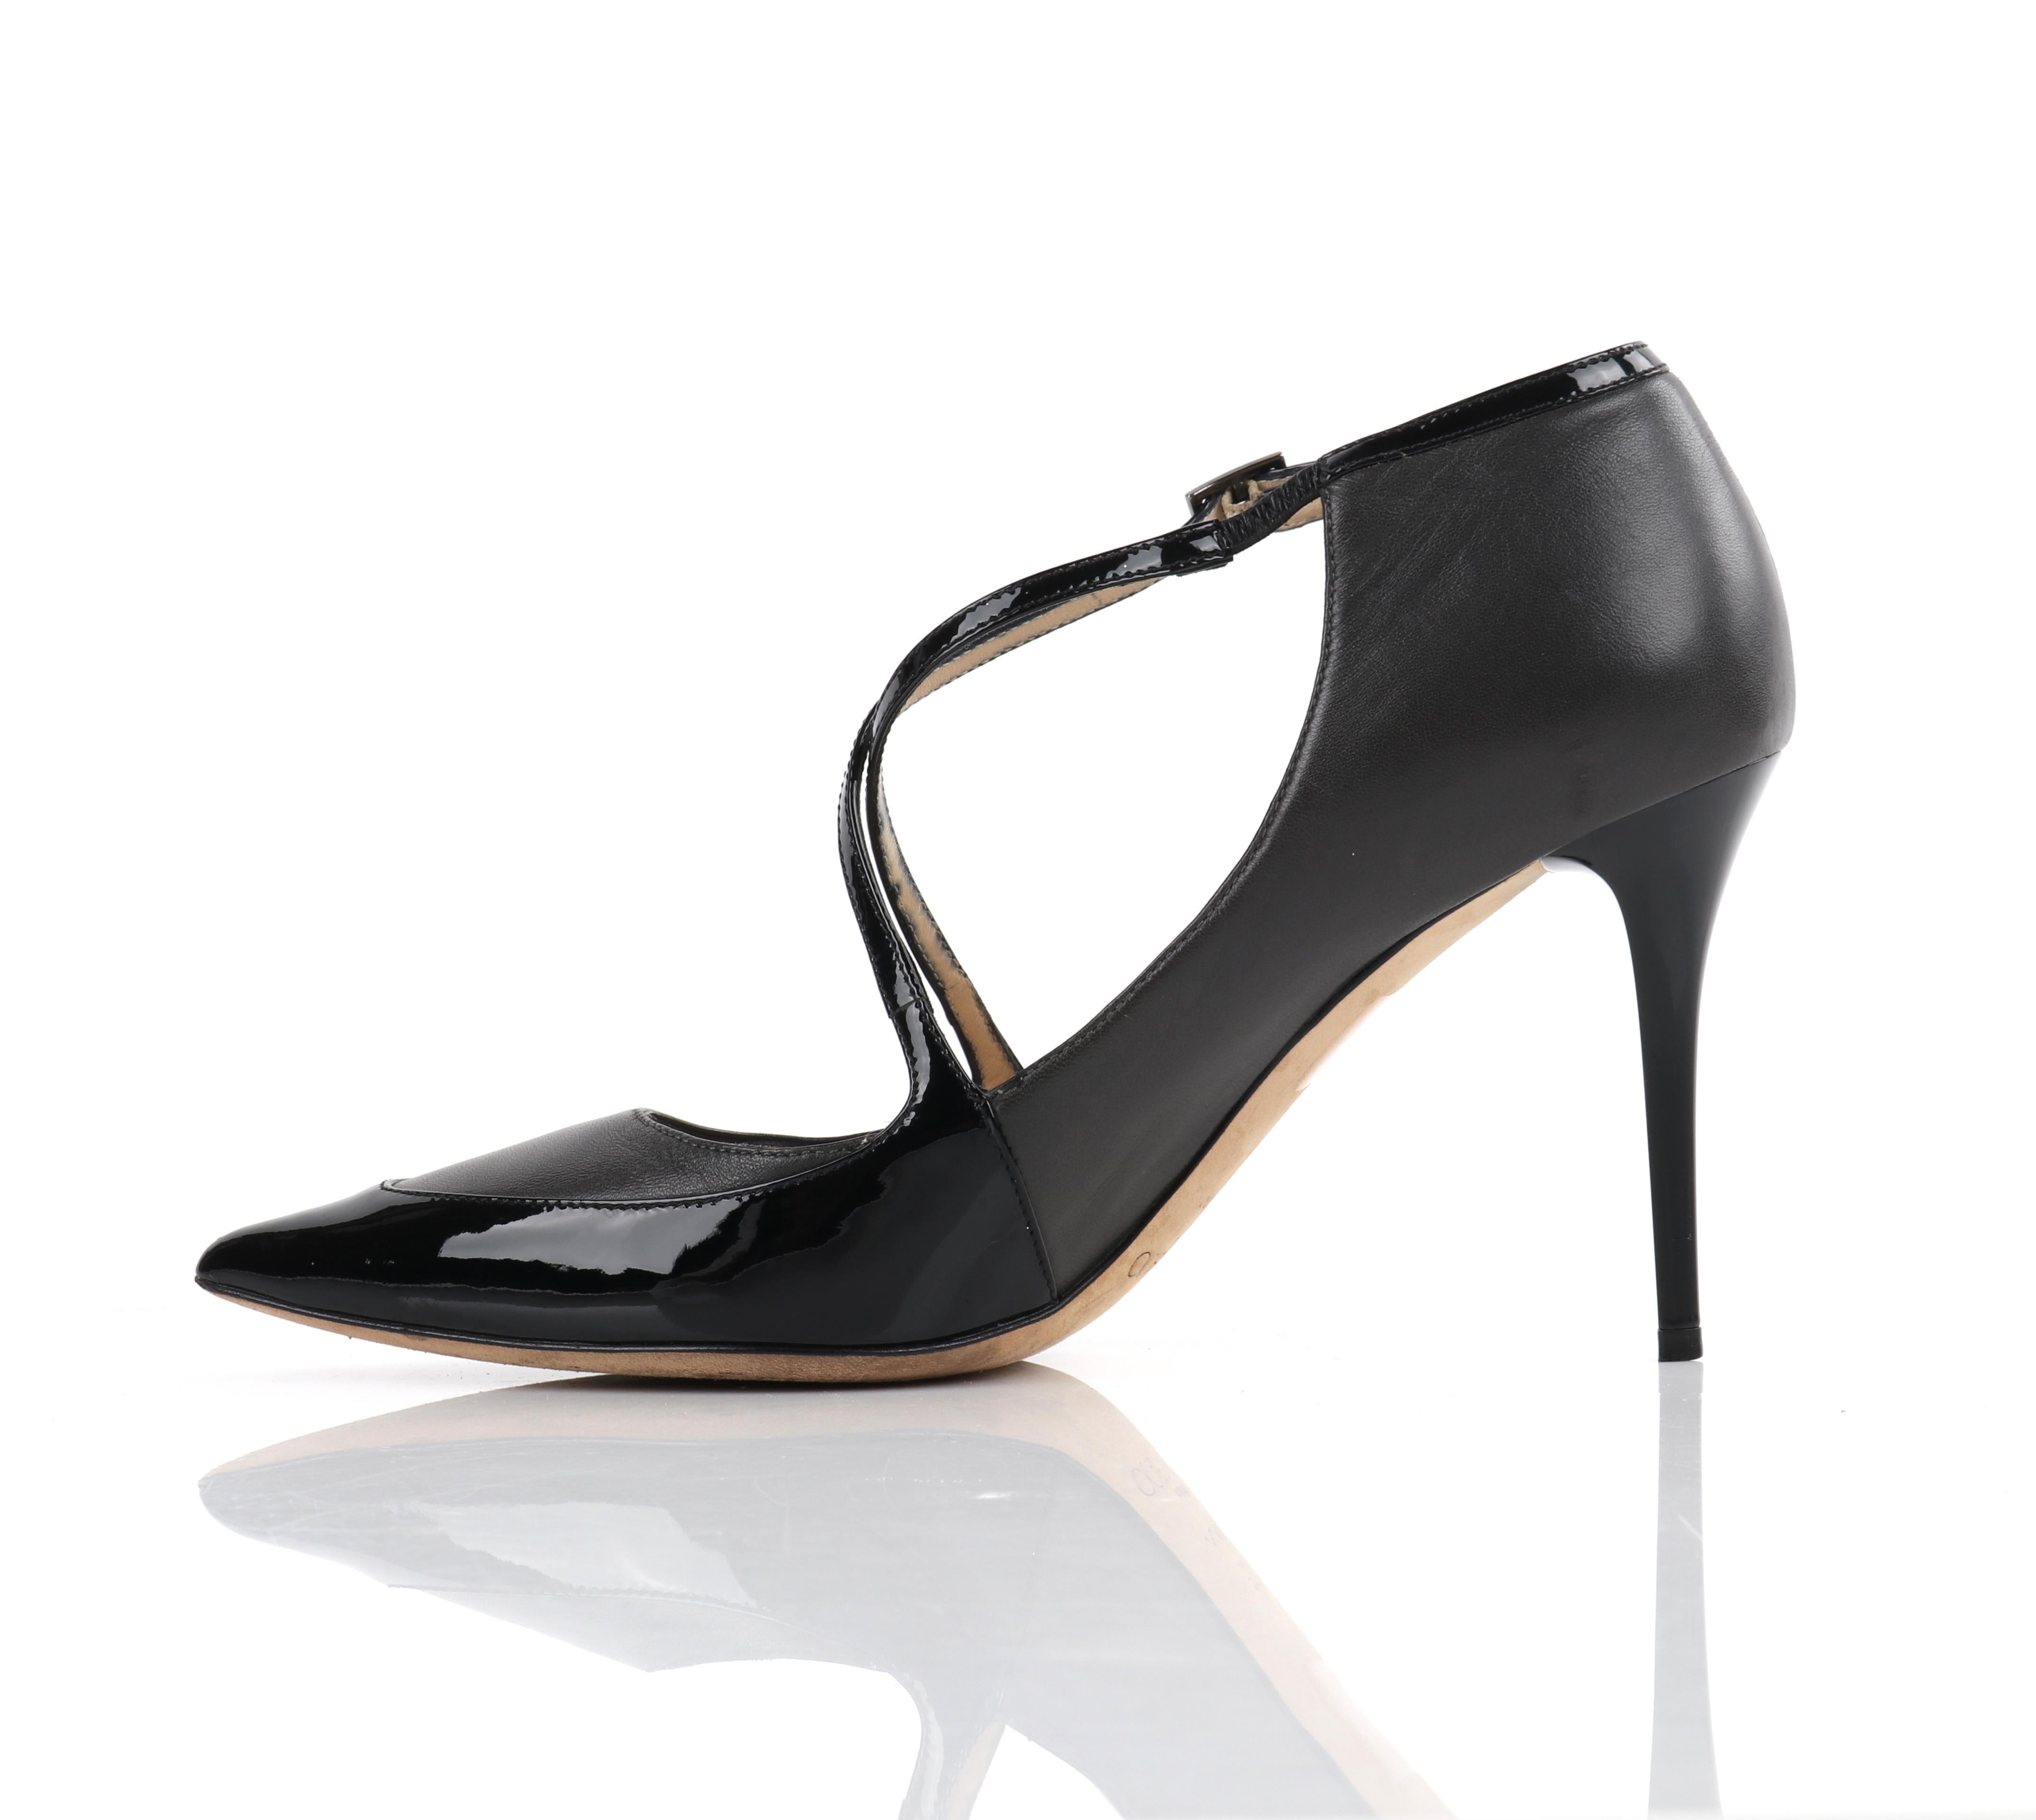 JIMMY CHOO “Madera” Gray Black Leather Criss Cross Strap Pointed Toe Pump Heels 
Estimated Retail: $695.00
 
Brand / Manufacturer: Jimmy Choo
Circa: 2014 
Style: Strappy heels
Color(s): Gray, black
Unmarked Materials (feel of): Exterior: Leather,